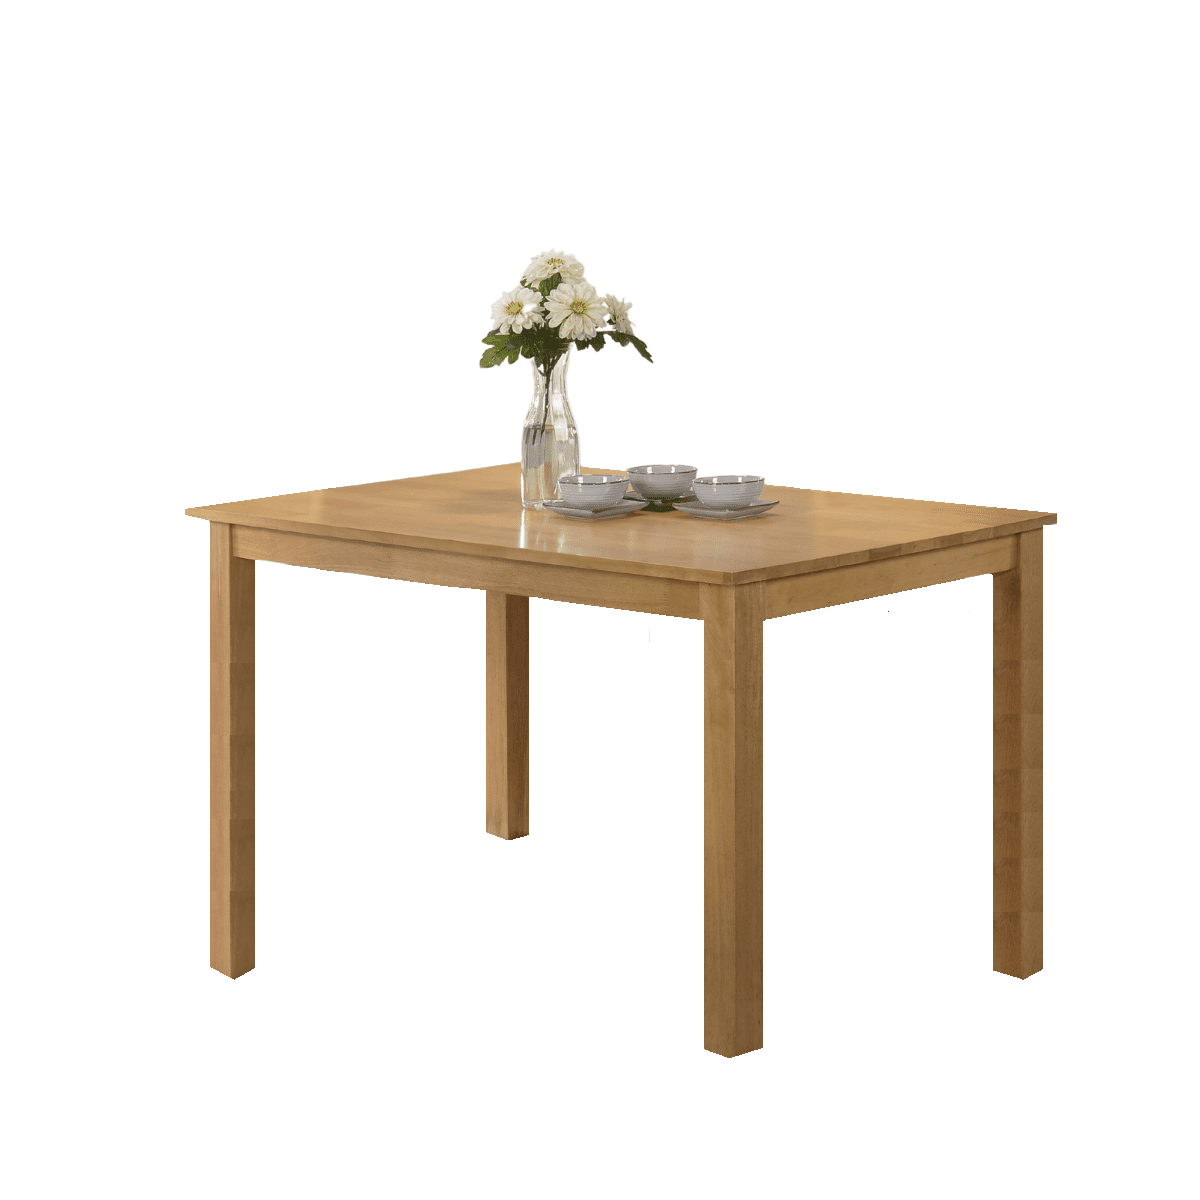 https://corcoransfurniture.ie/product/dallas-dining-table/